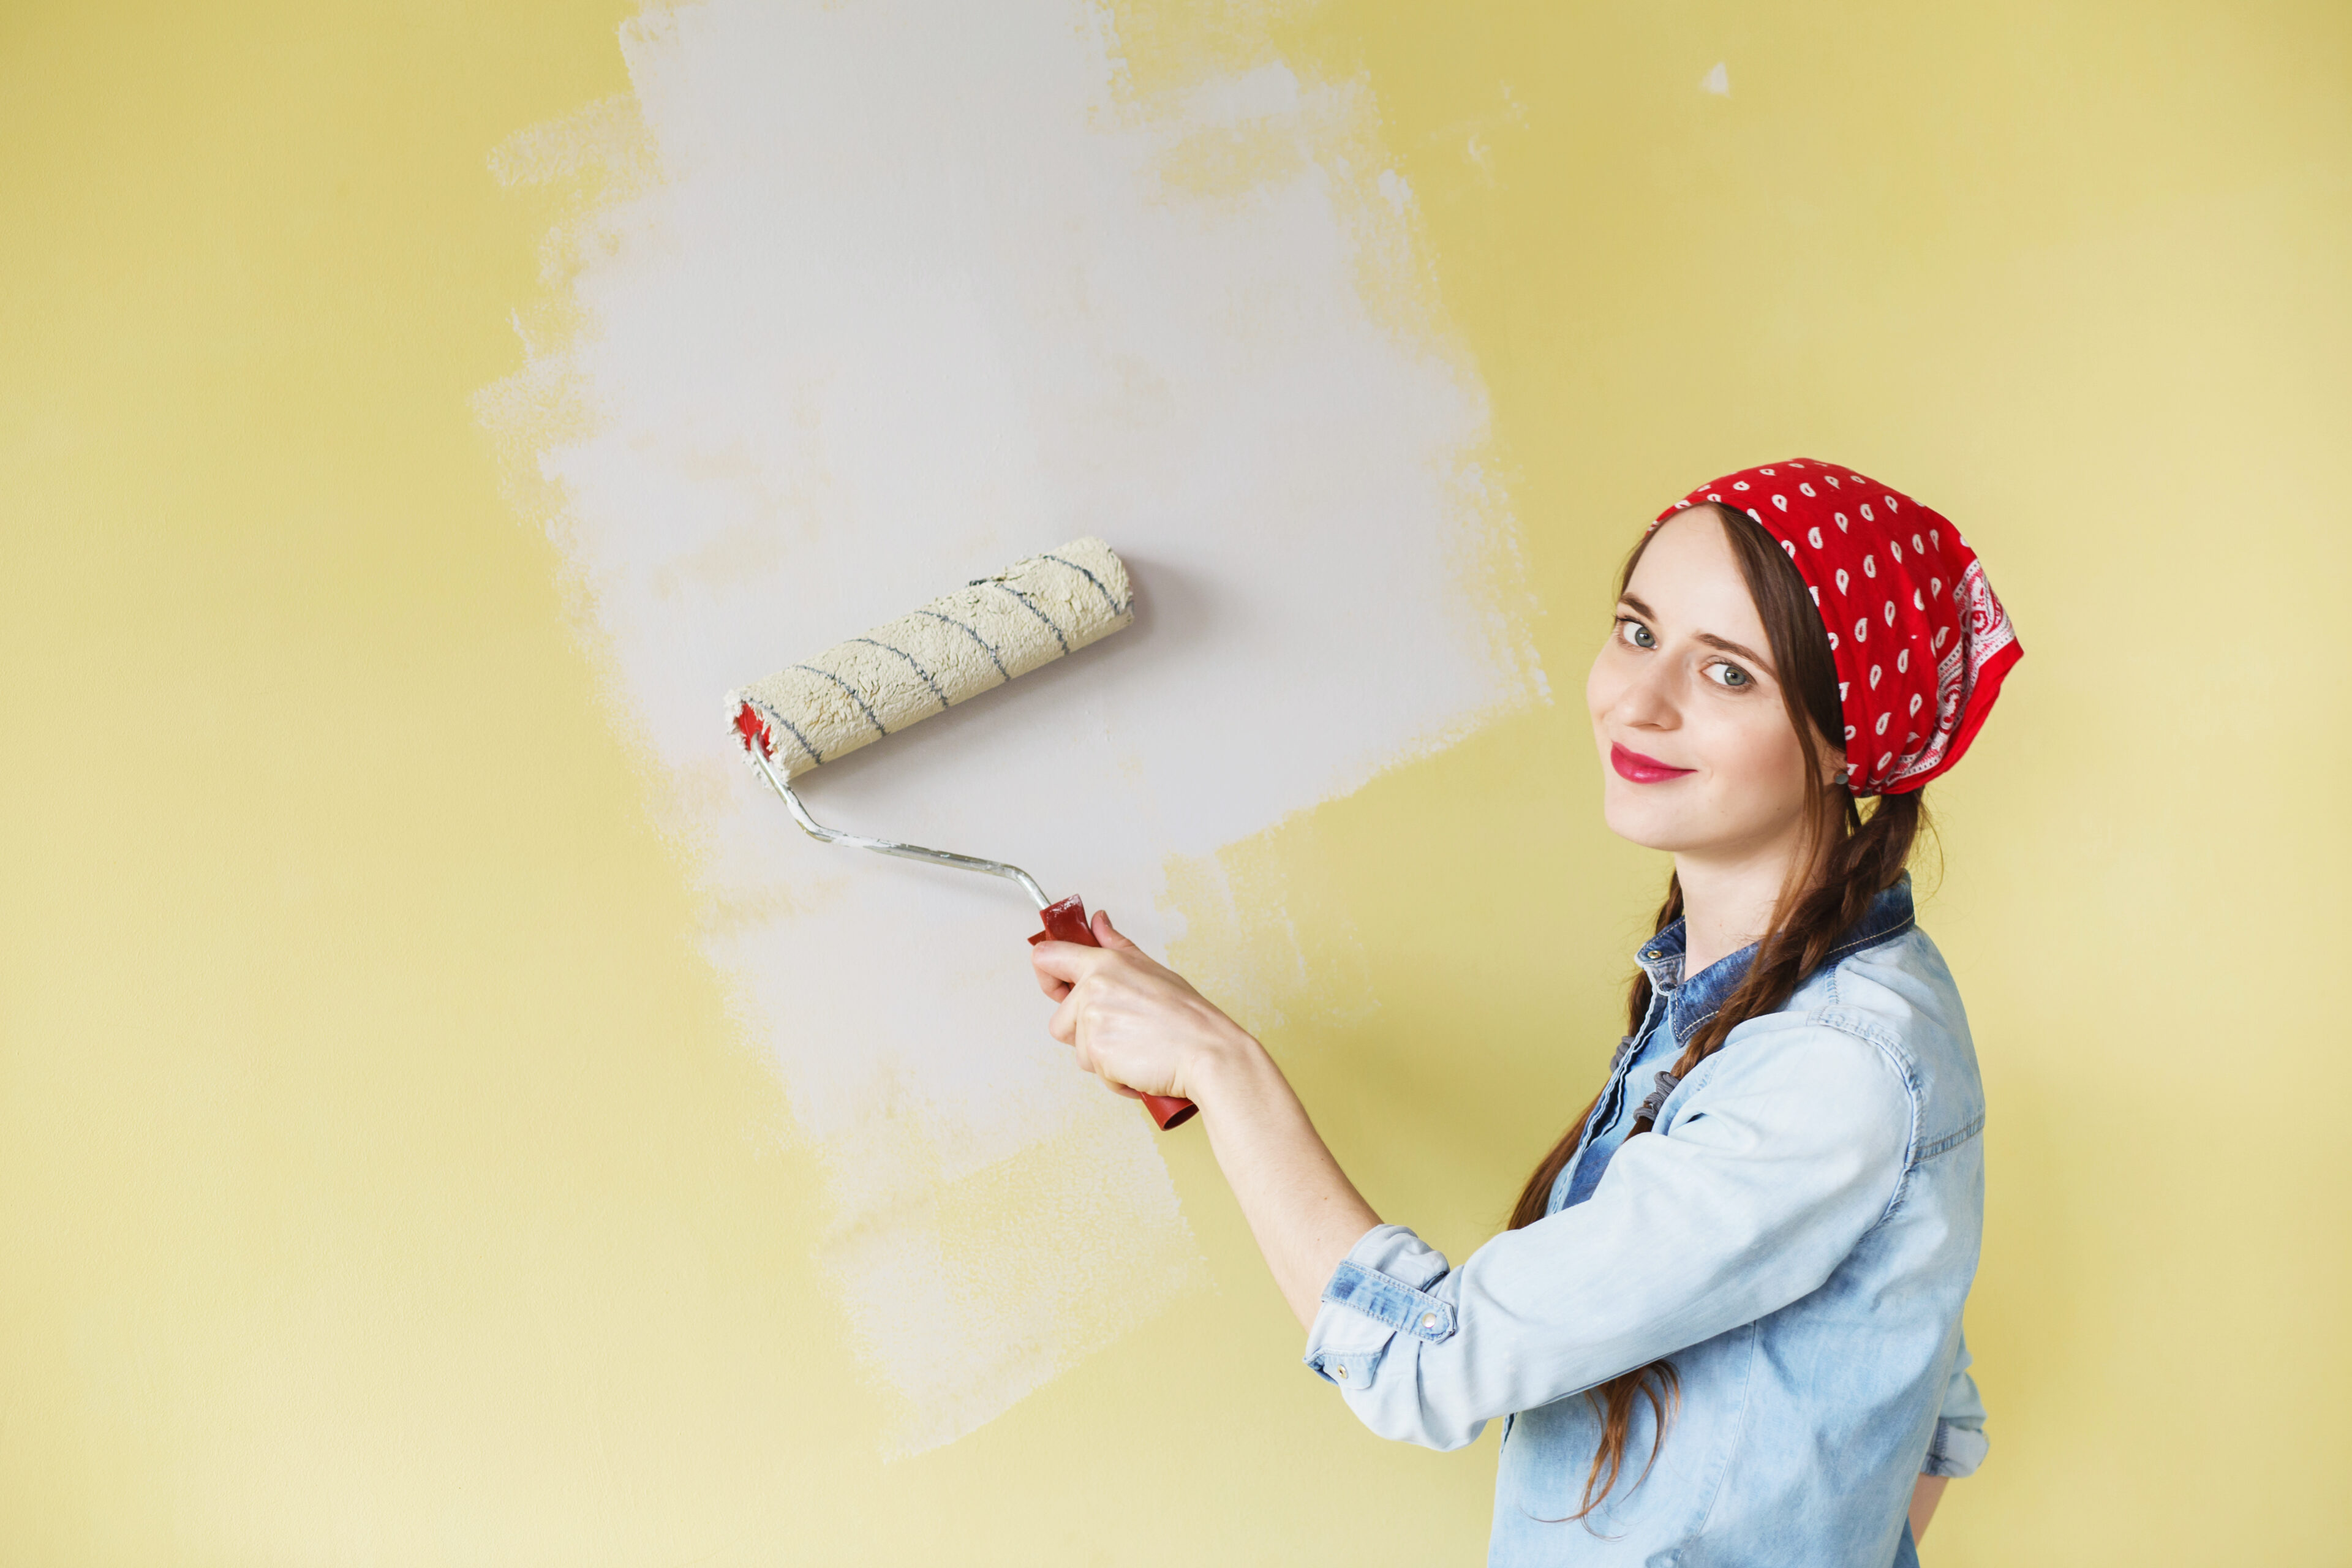 Beautiful girl in red Headband painting the wall with paint roller